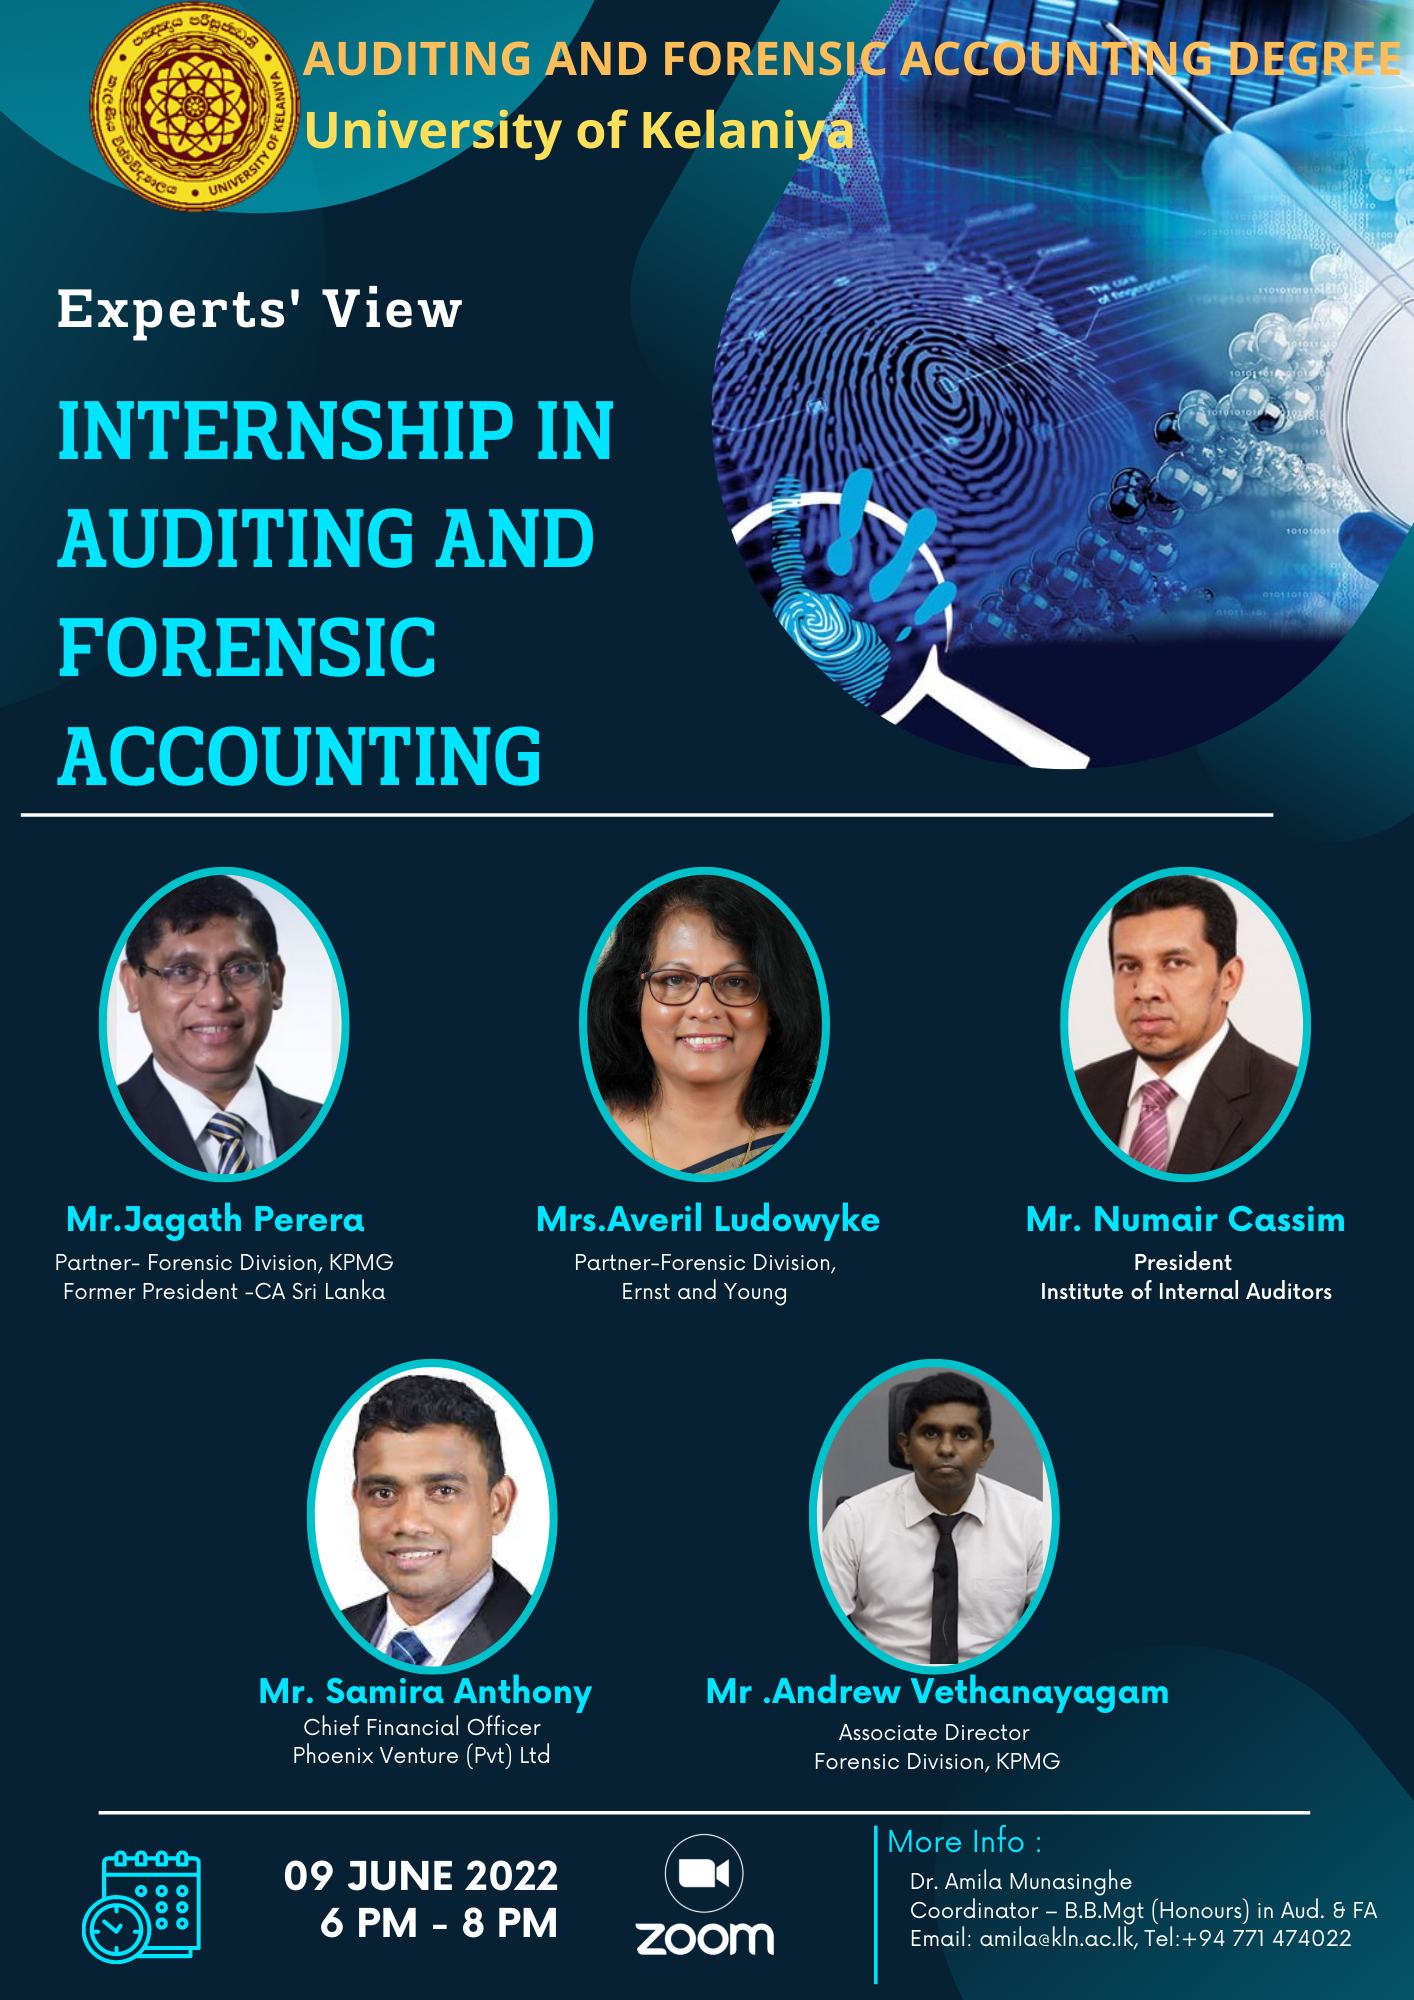 Experts' view - Internship in Auditing and Forensic Accounting